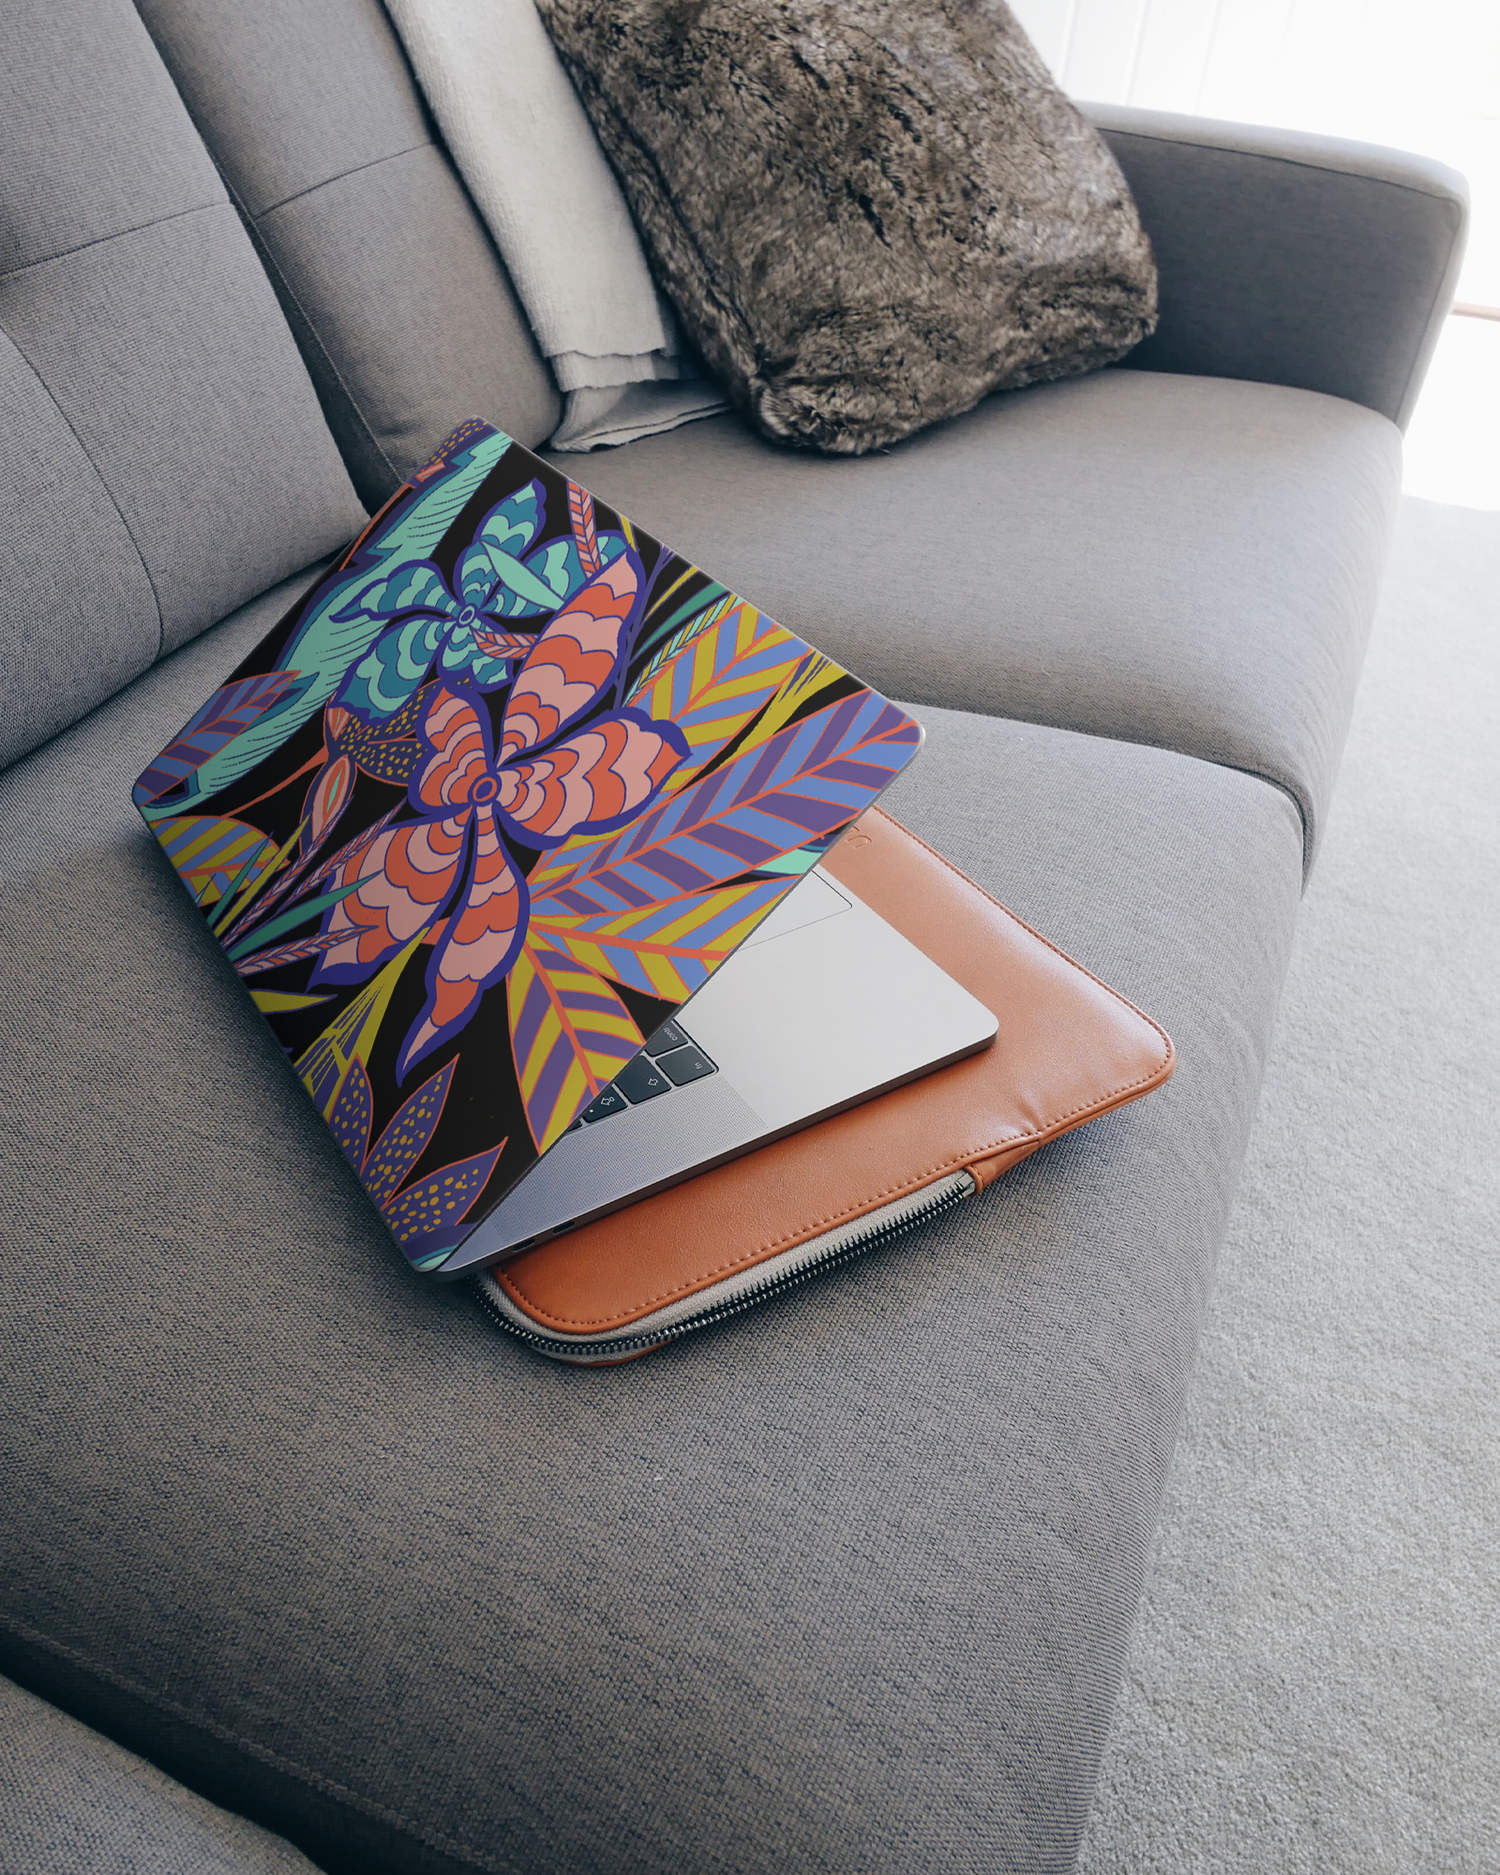 Tropical Psychedelic Pattern Laptop Skin for 15 inch Apple MacBooks on a couch